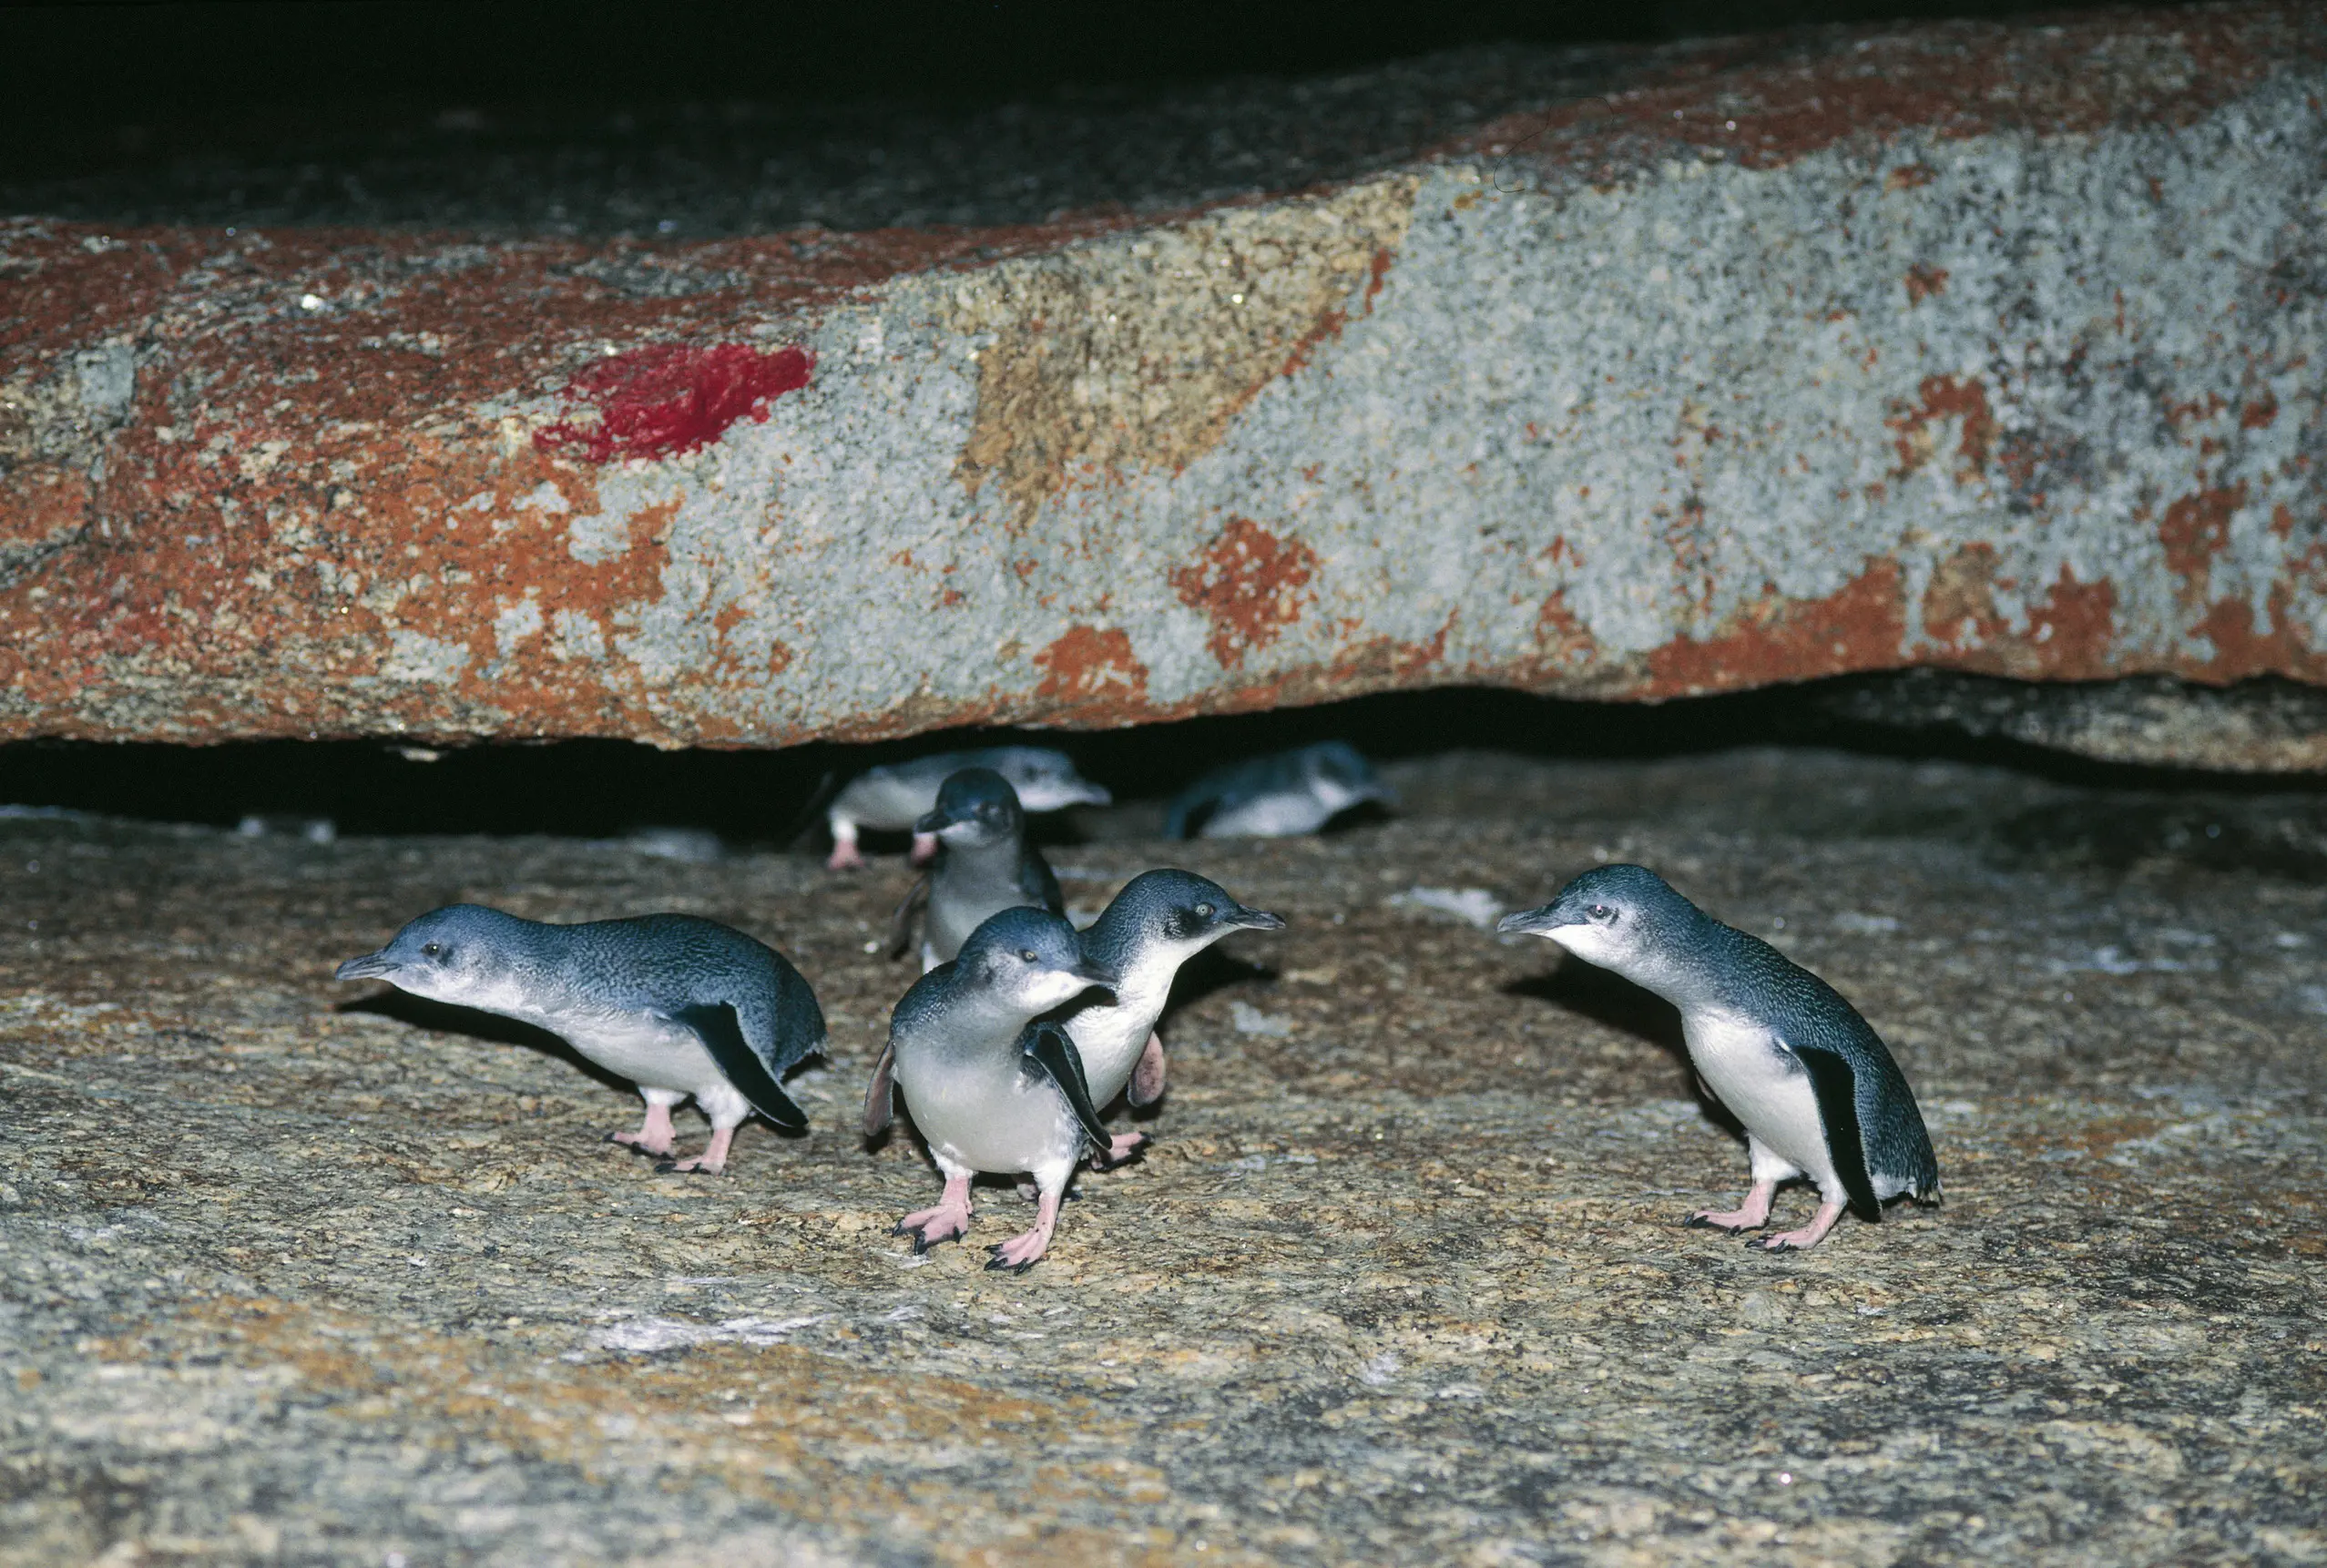 A group of Little Penguins hanging out in the night.